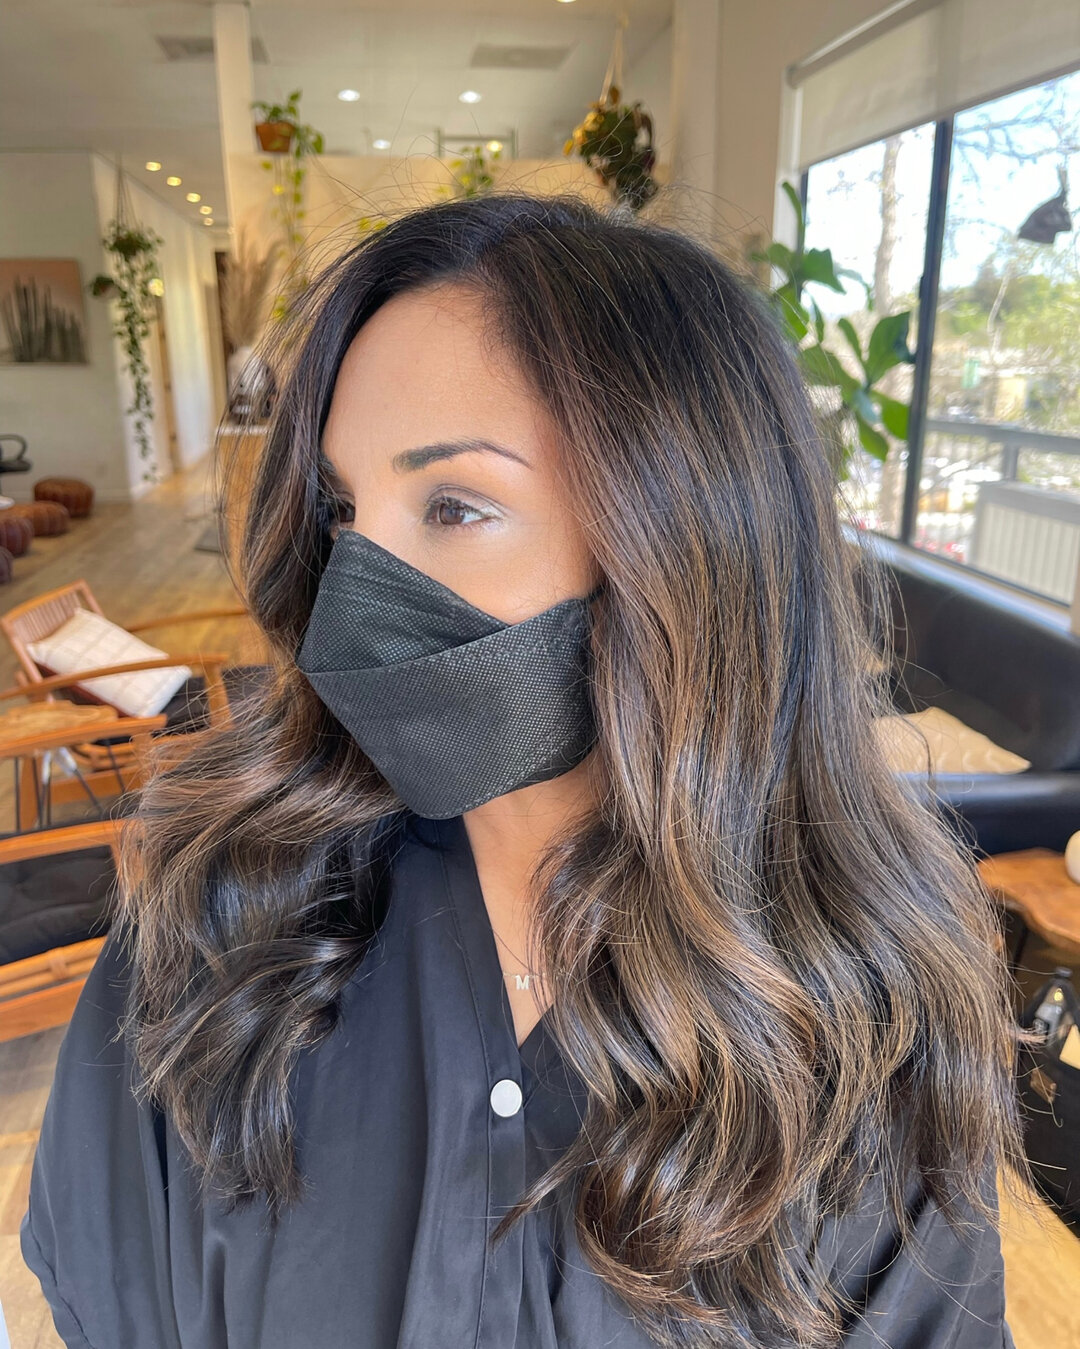 ❋ Subtle lived in color is @coloristjess_ specialty ❋​​​​​​​​
​​​​​​​​
She added some highlights to make this mama feel bright and refreshed. ​​​​​​​​
​​​​​​​​
Up keep for a look like this would be coming in for a toner every 6-8 weeks and every 3-4 